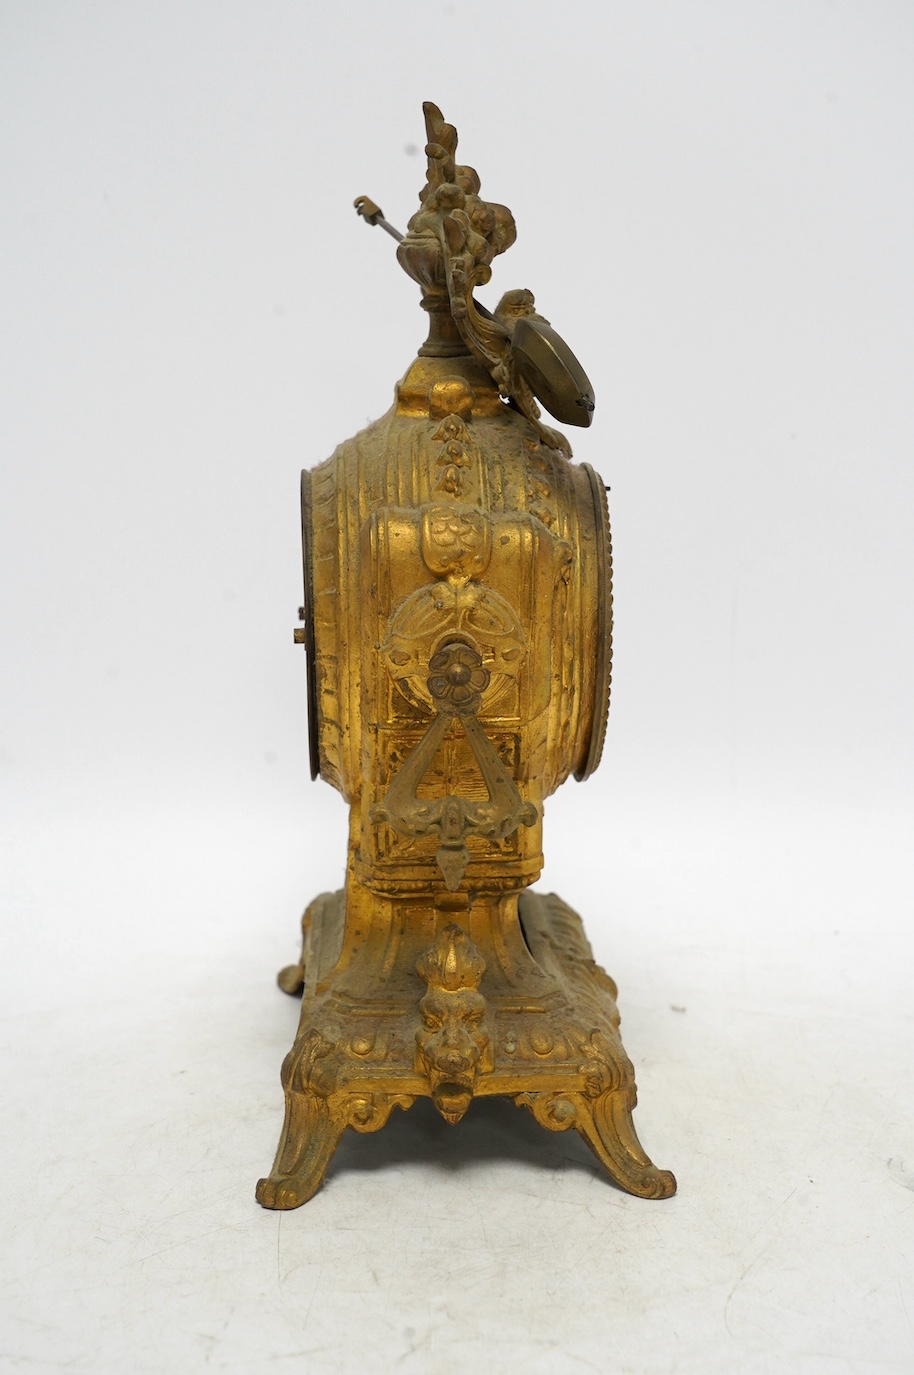 A 19th century gilt spelter mantel clock, with ceramic decorated dial and panel, 30cm high. Condition - not checked if in working condition, case fair